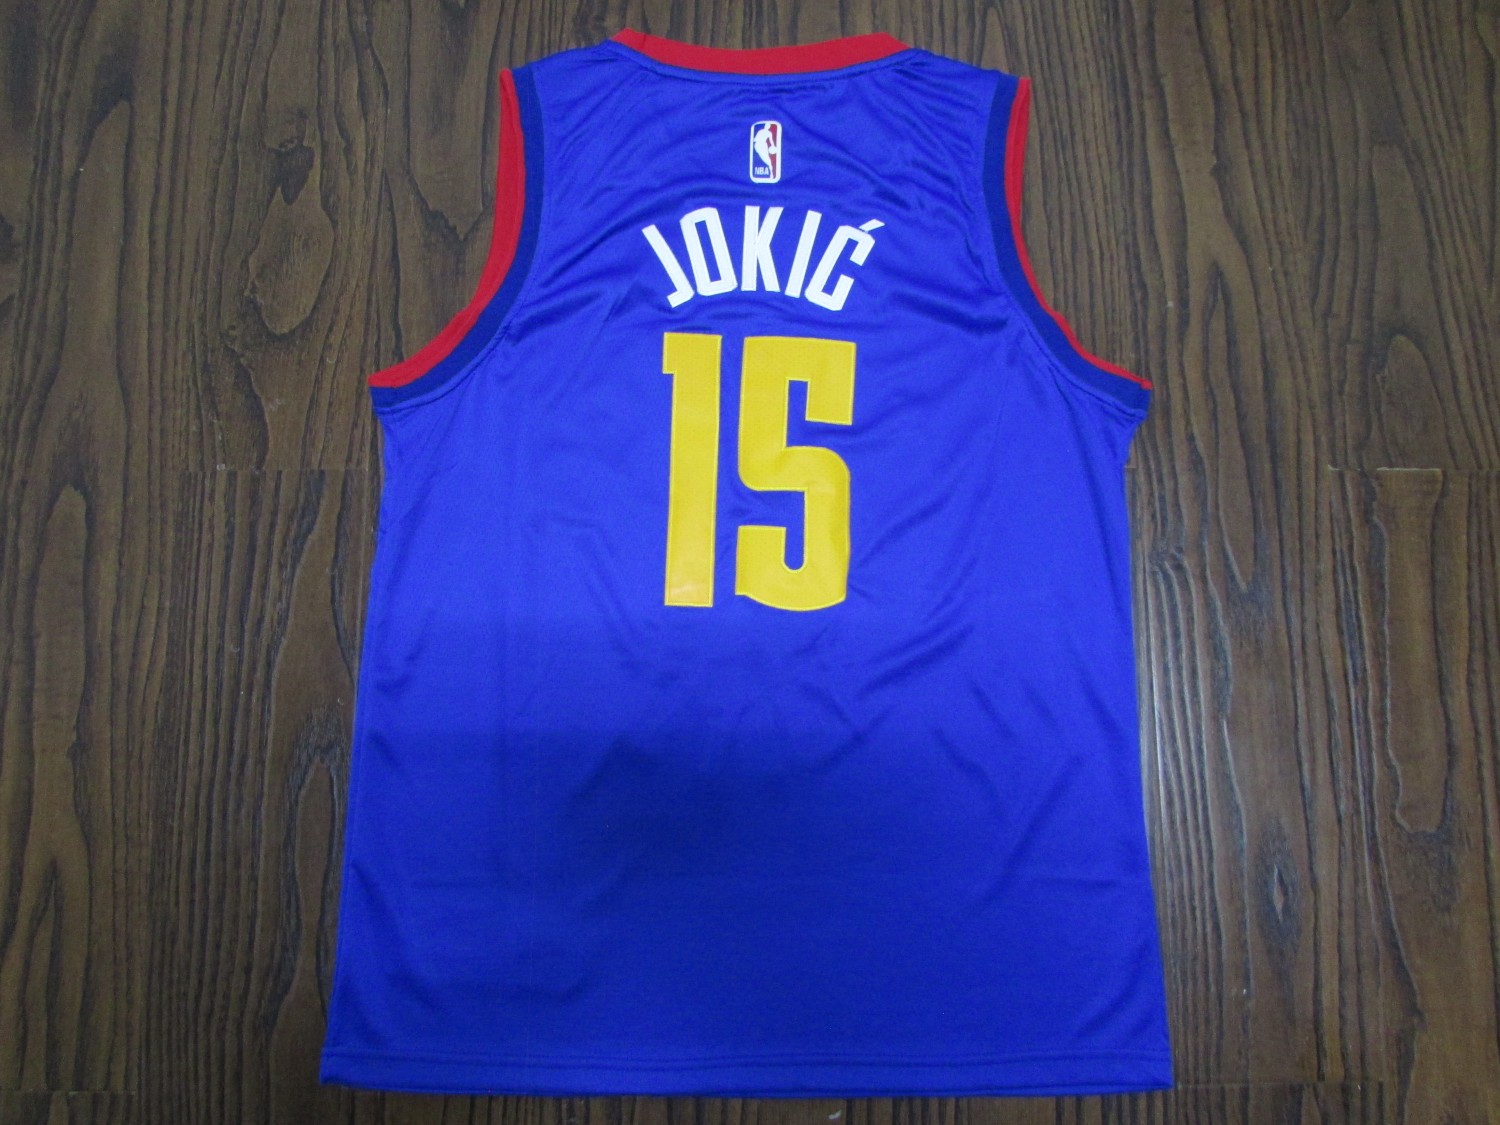 2019-20 Adult Nuggets basketball jersey shirt Jokic 15 Colorful blue